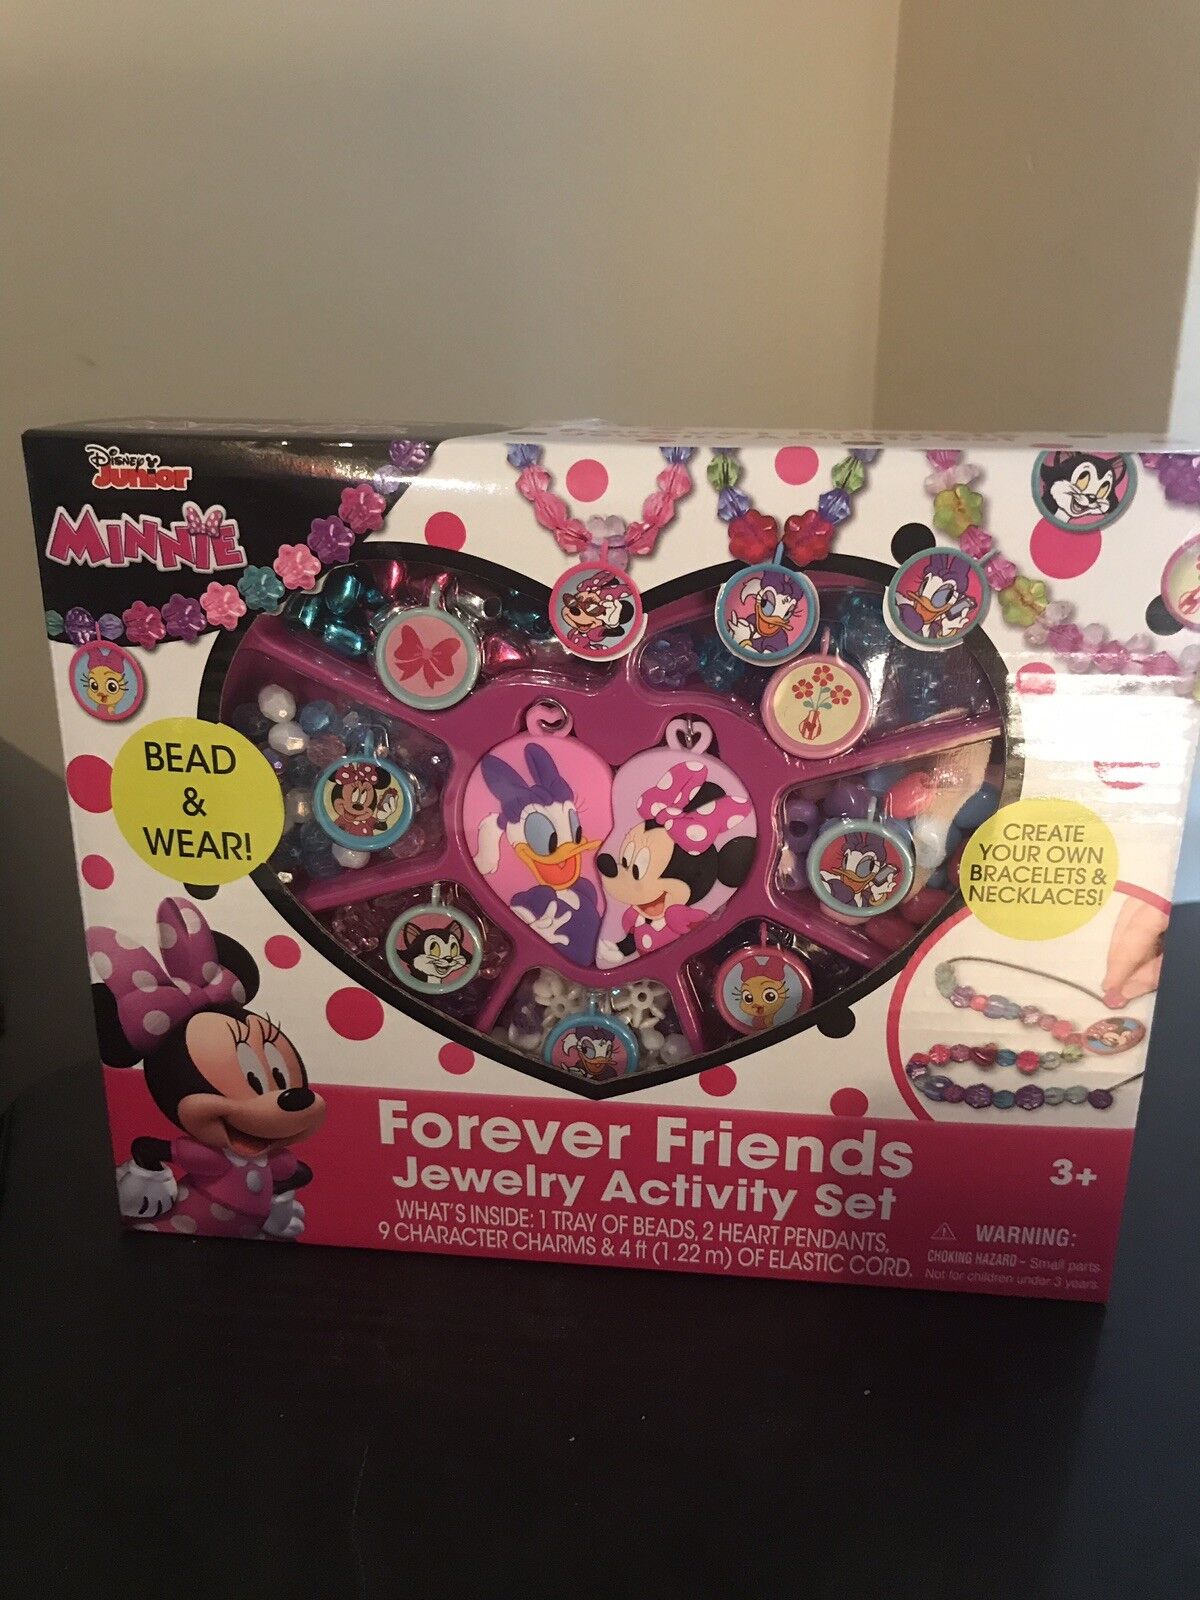 Disney Junior Minnie Forever Friends Jewelry Box Kit Activity Play Set Gift(New)